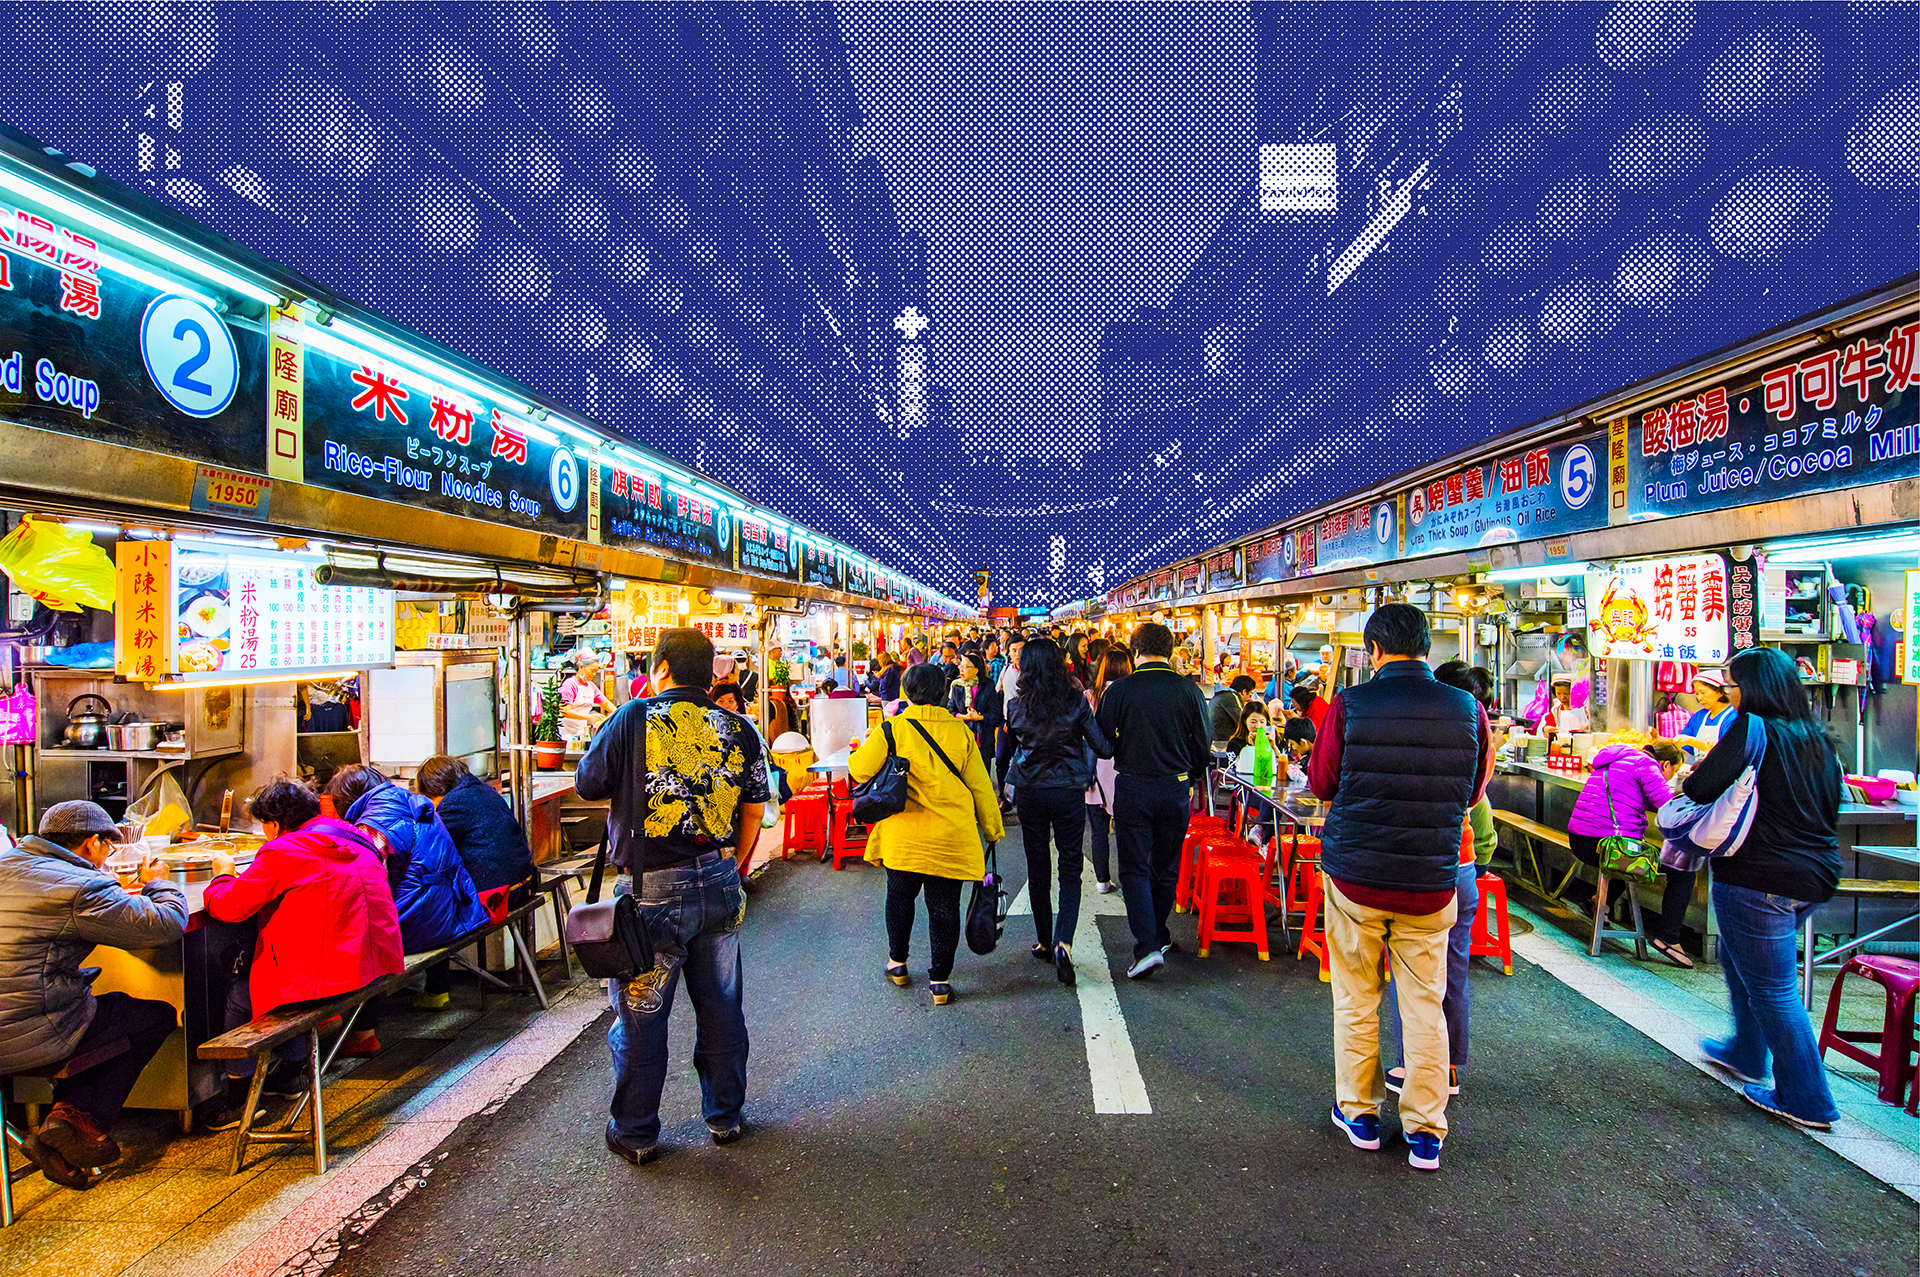 A crowded night market in Keelung, Taiwan, lined with brightly lit food stalls